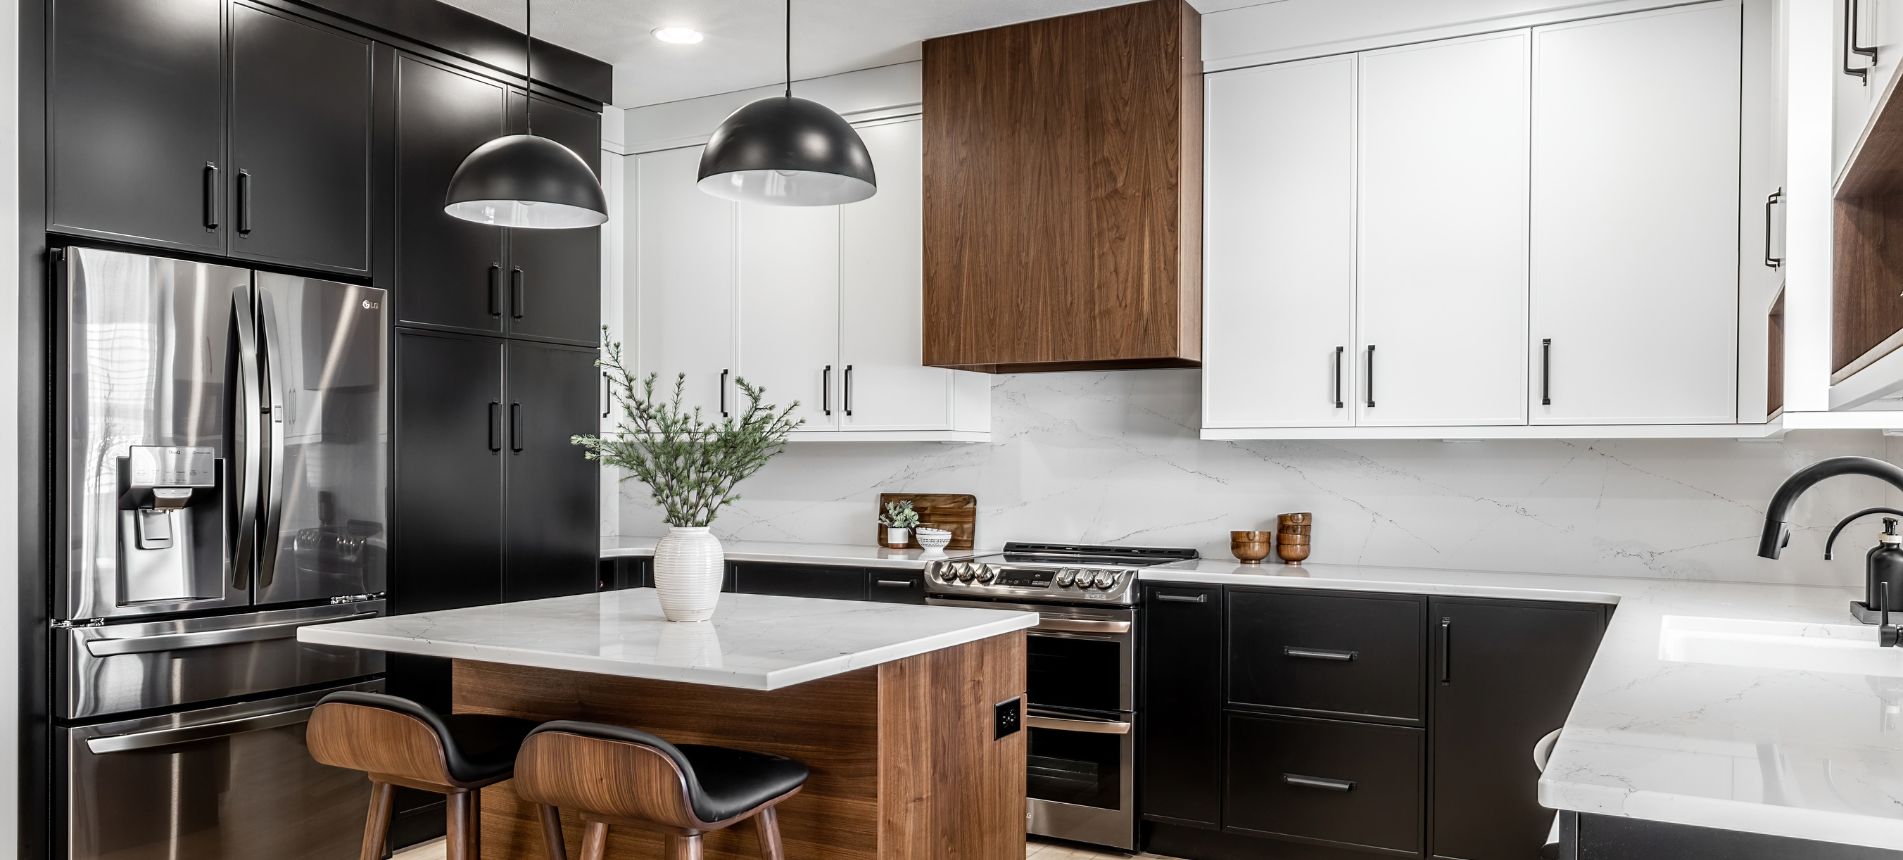 Best Hardware Finishes for a Transitional Kitchen
